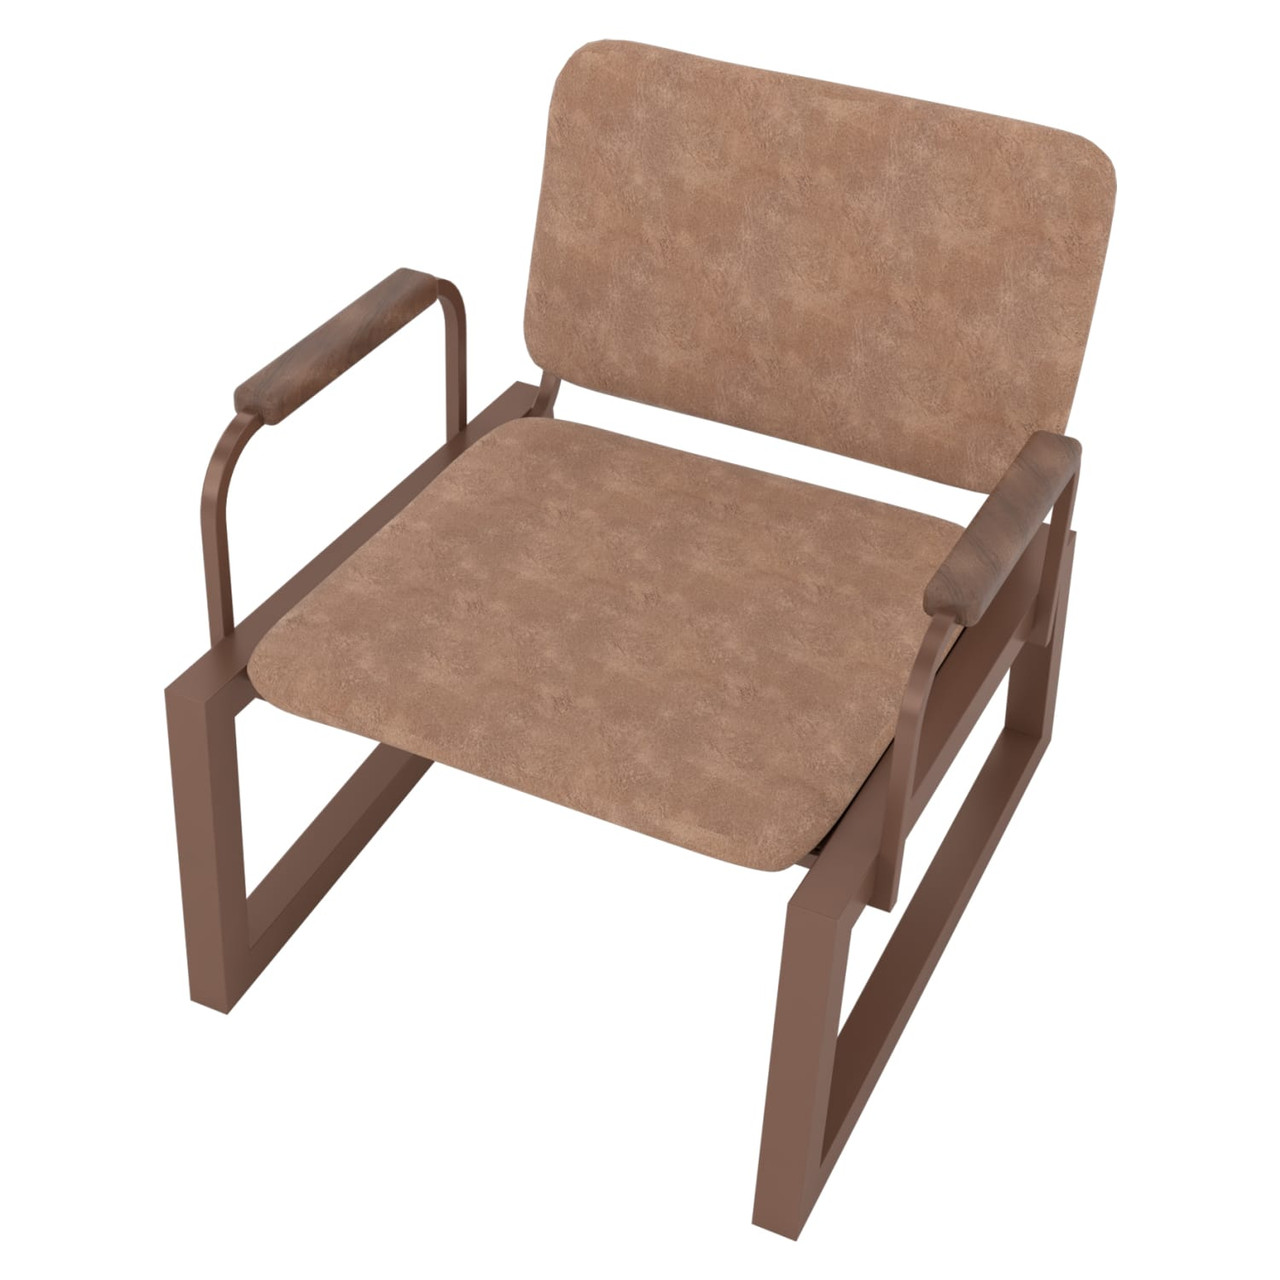 Whythe PU Leather Low Accent Chair 1.0 in Corten